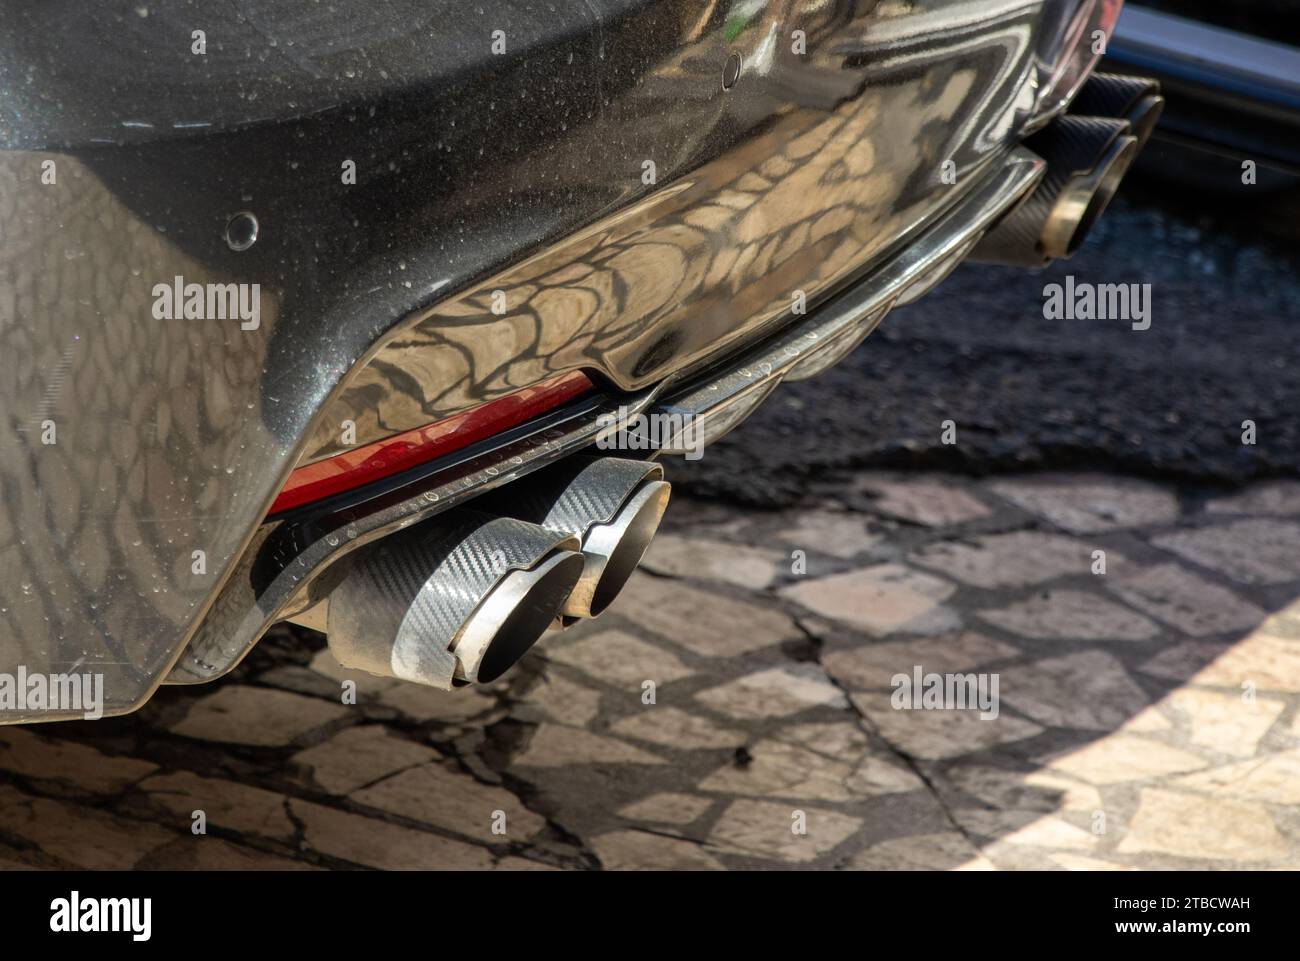 Sports car double exhaust black color close-up view Stock Photo